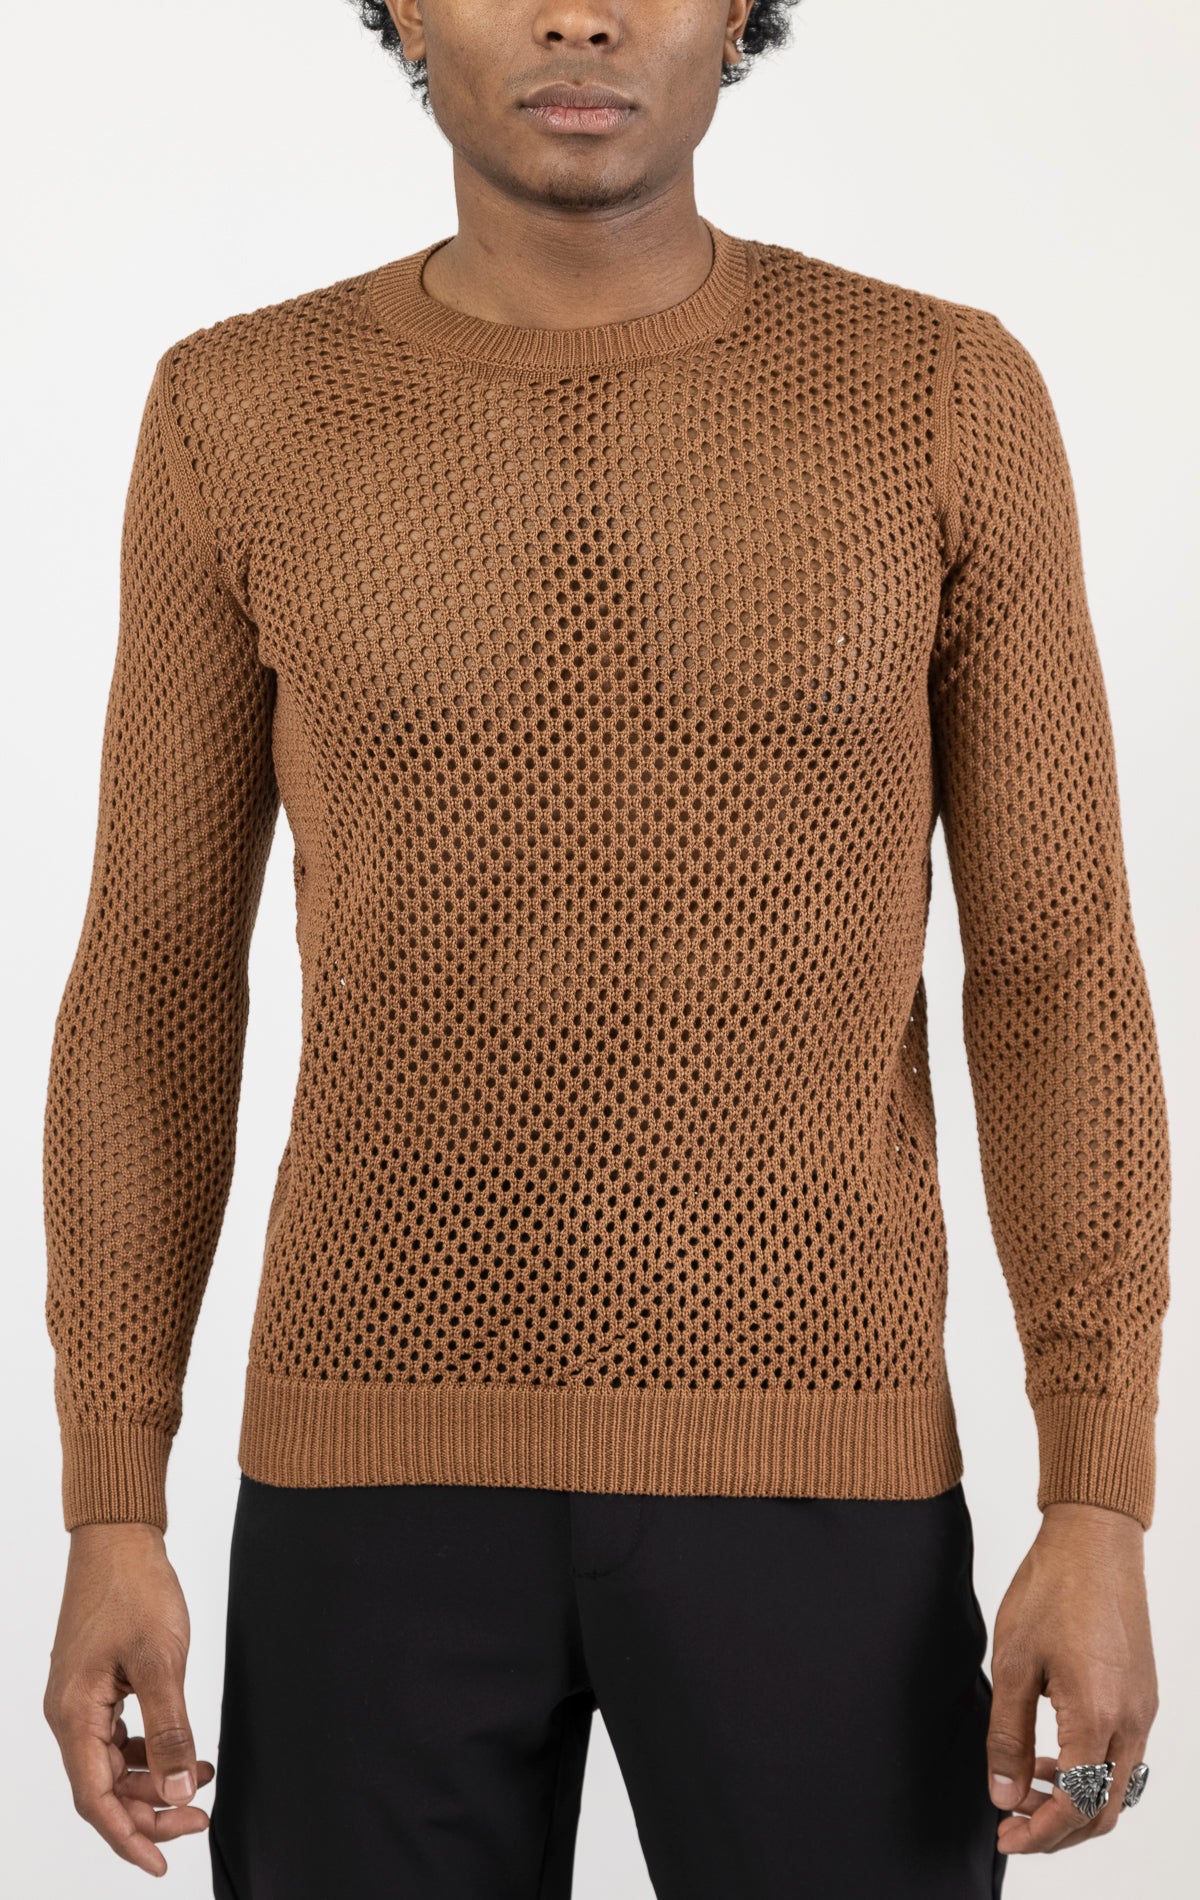 Men's see-through fishnet muscle fit shirt in brown. The shirt is made from a 50% cotton, 50% acrylic blend and features a muscle fit silhouette with a see-through fishnet fabric design.